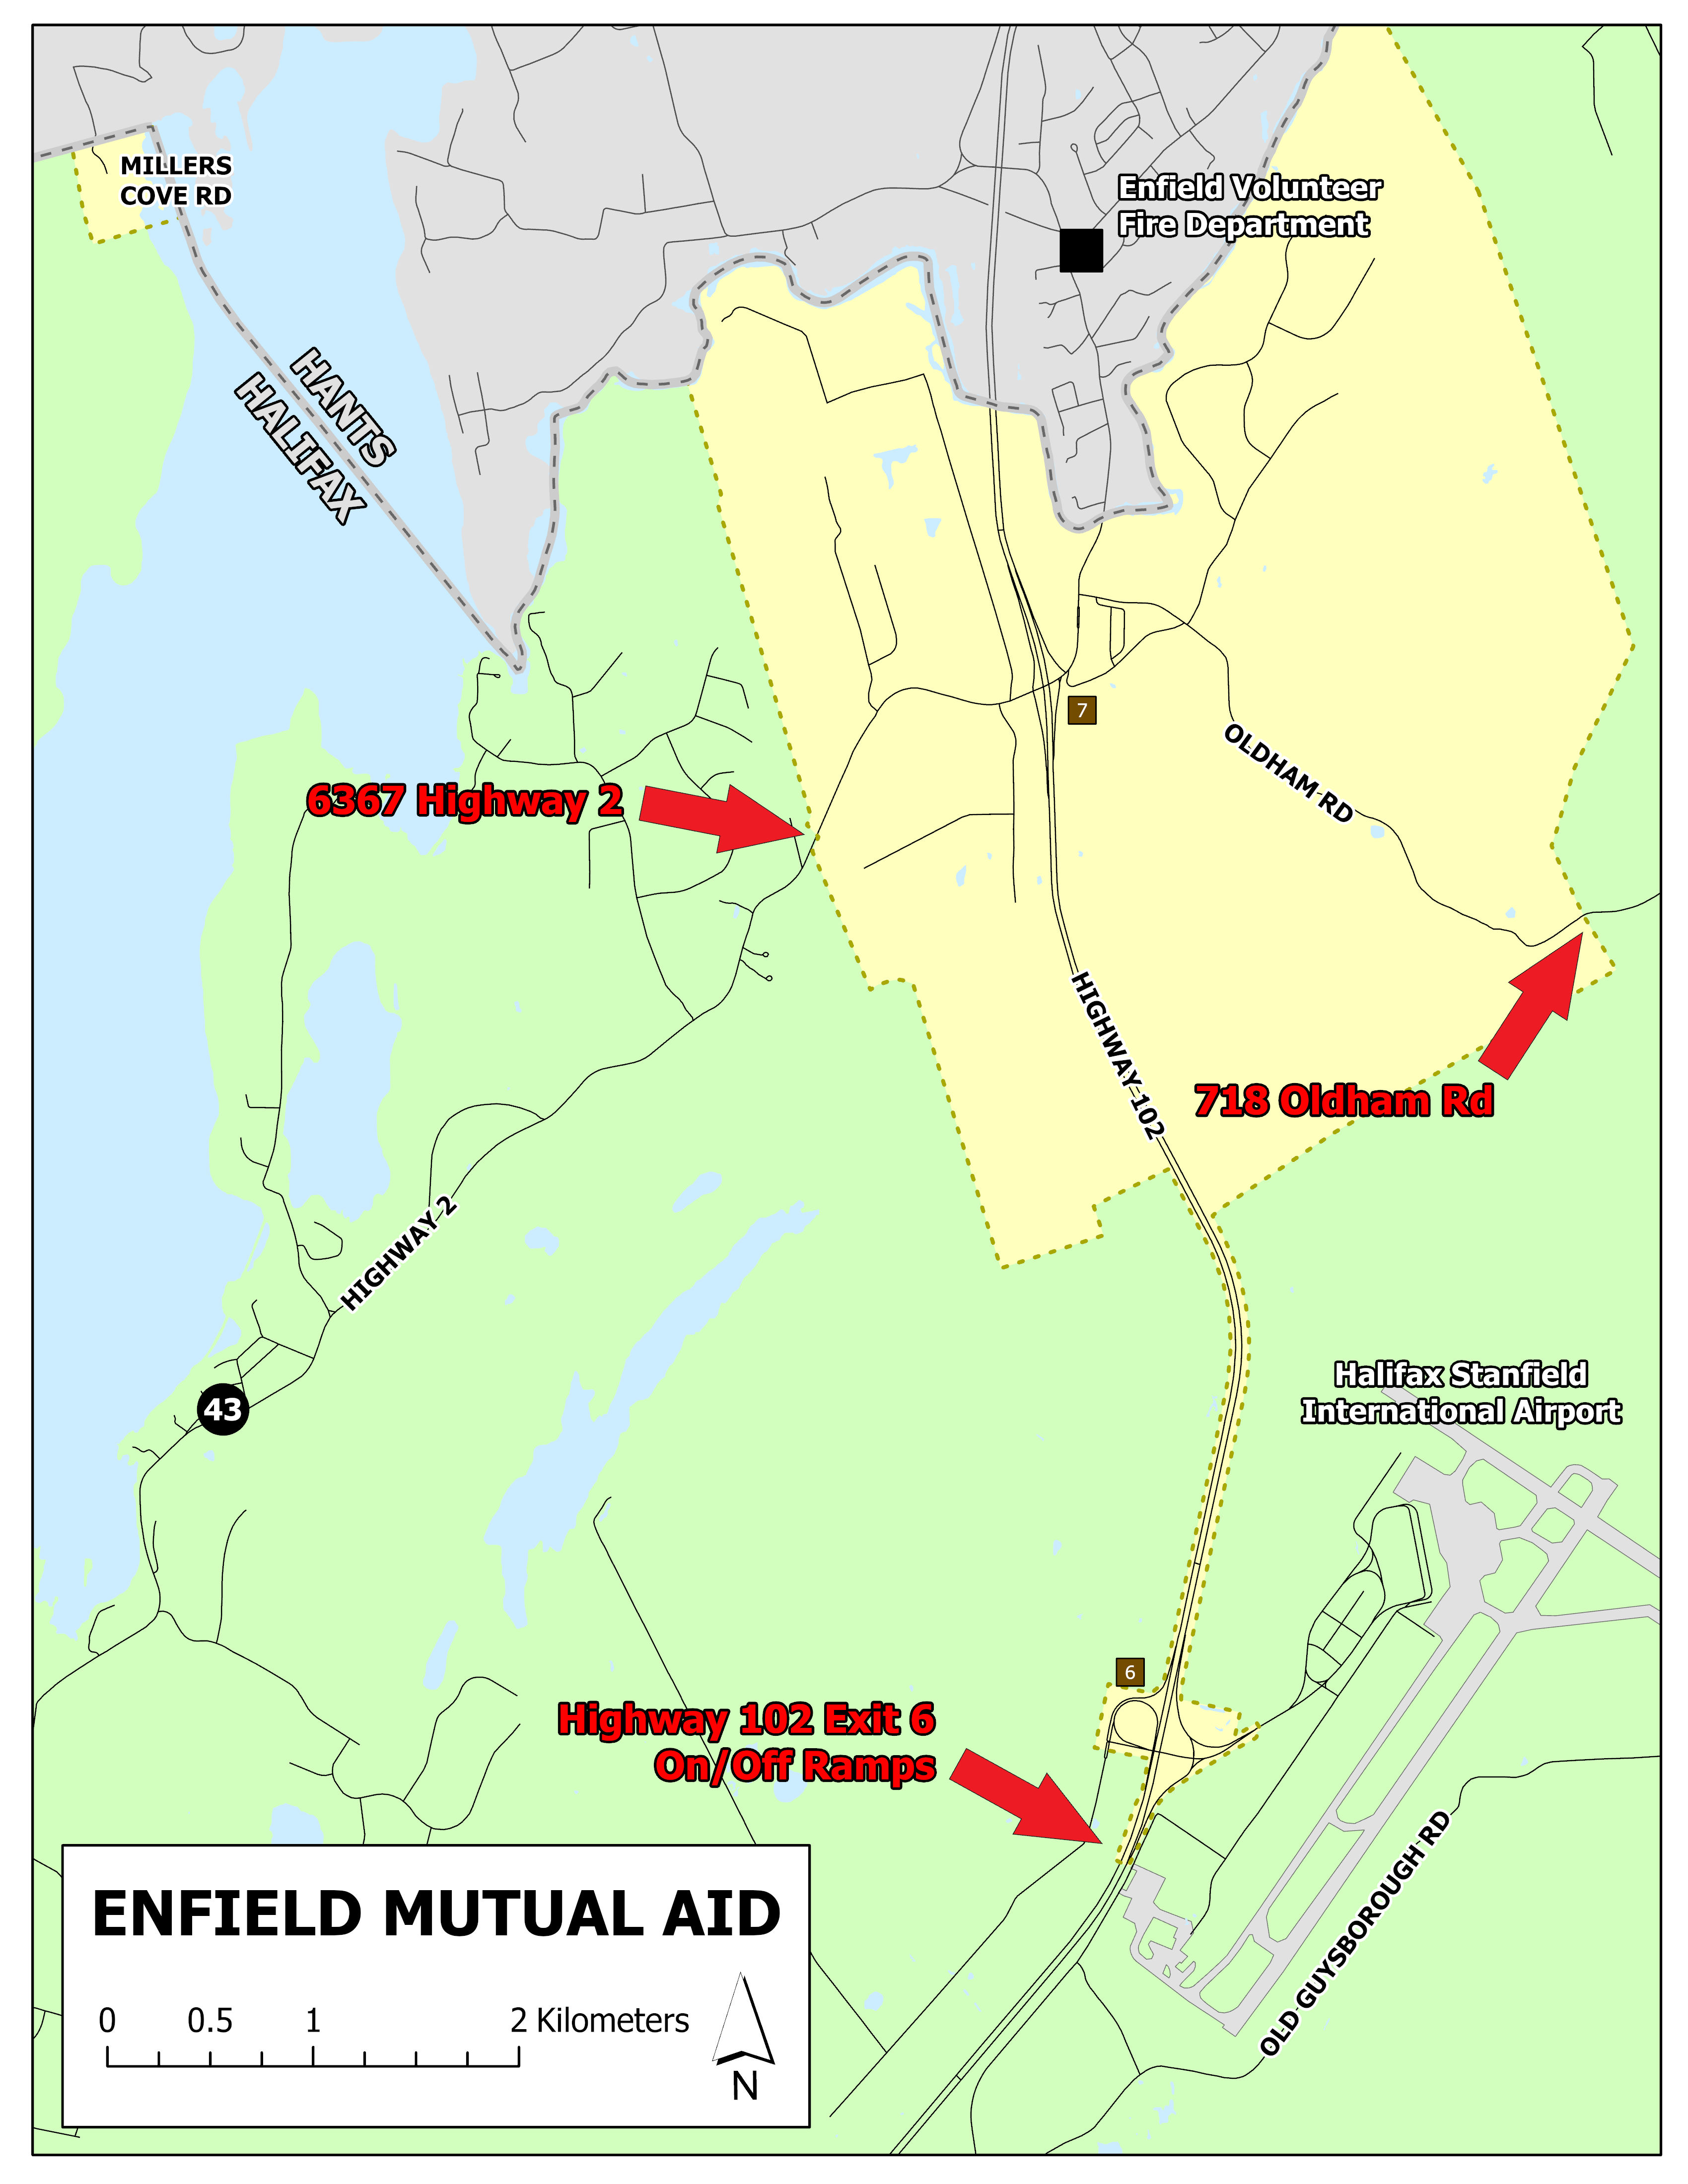 An aerial map showing the Enfield Fire coverage changes